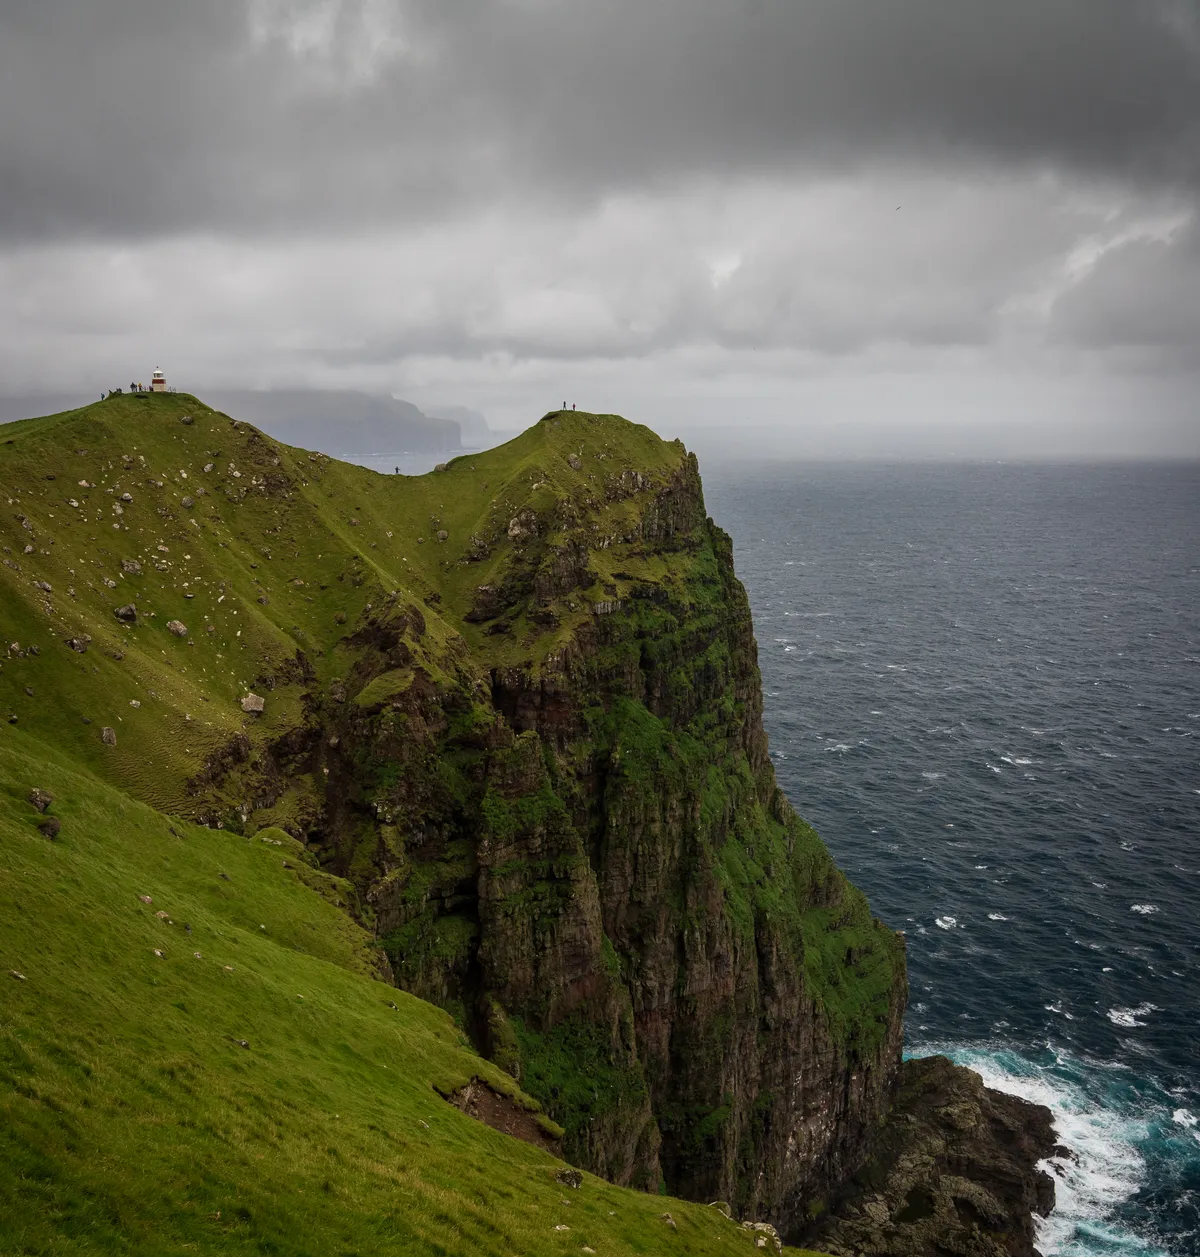 Our hike report for our hike up to Kallur Lighthouse and the spot of James Bondâ€™s demise in No Time To Die!